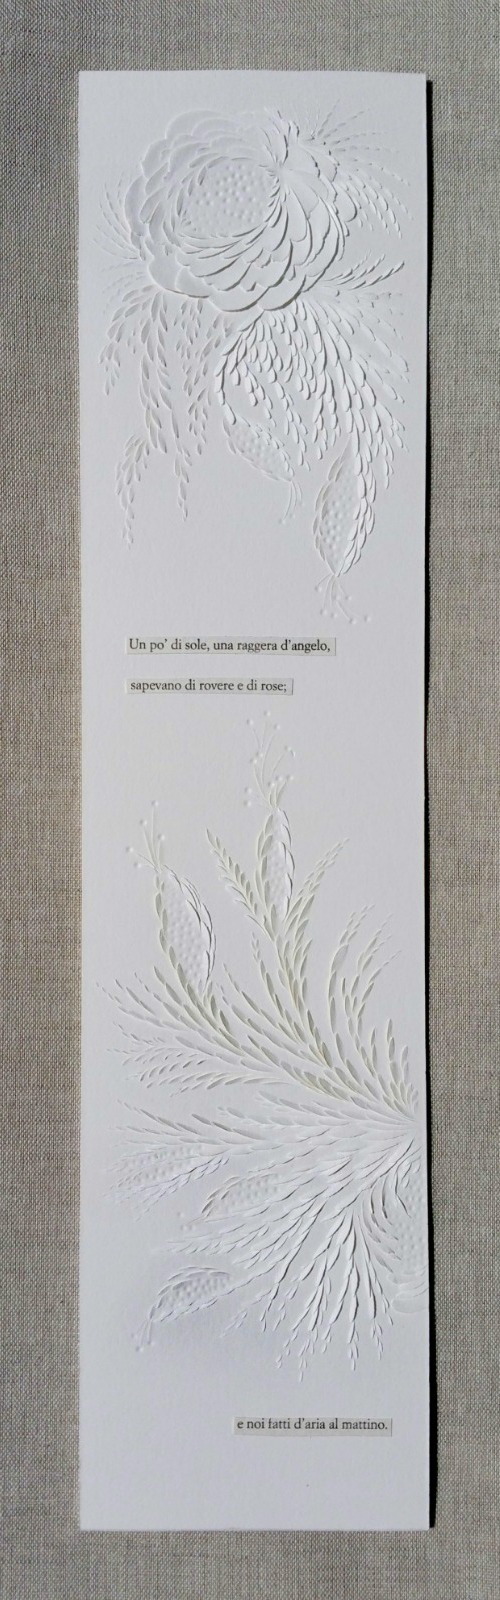 narrow, vertical, all-white paper carving on wall